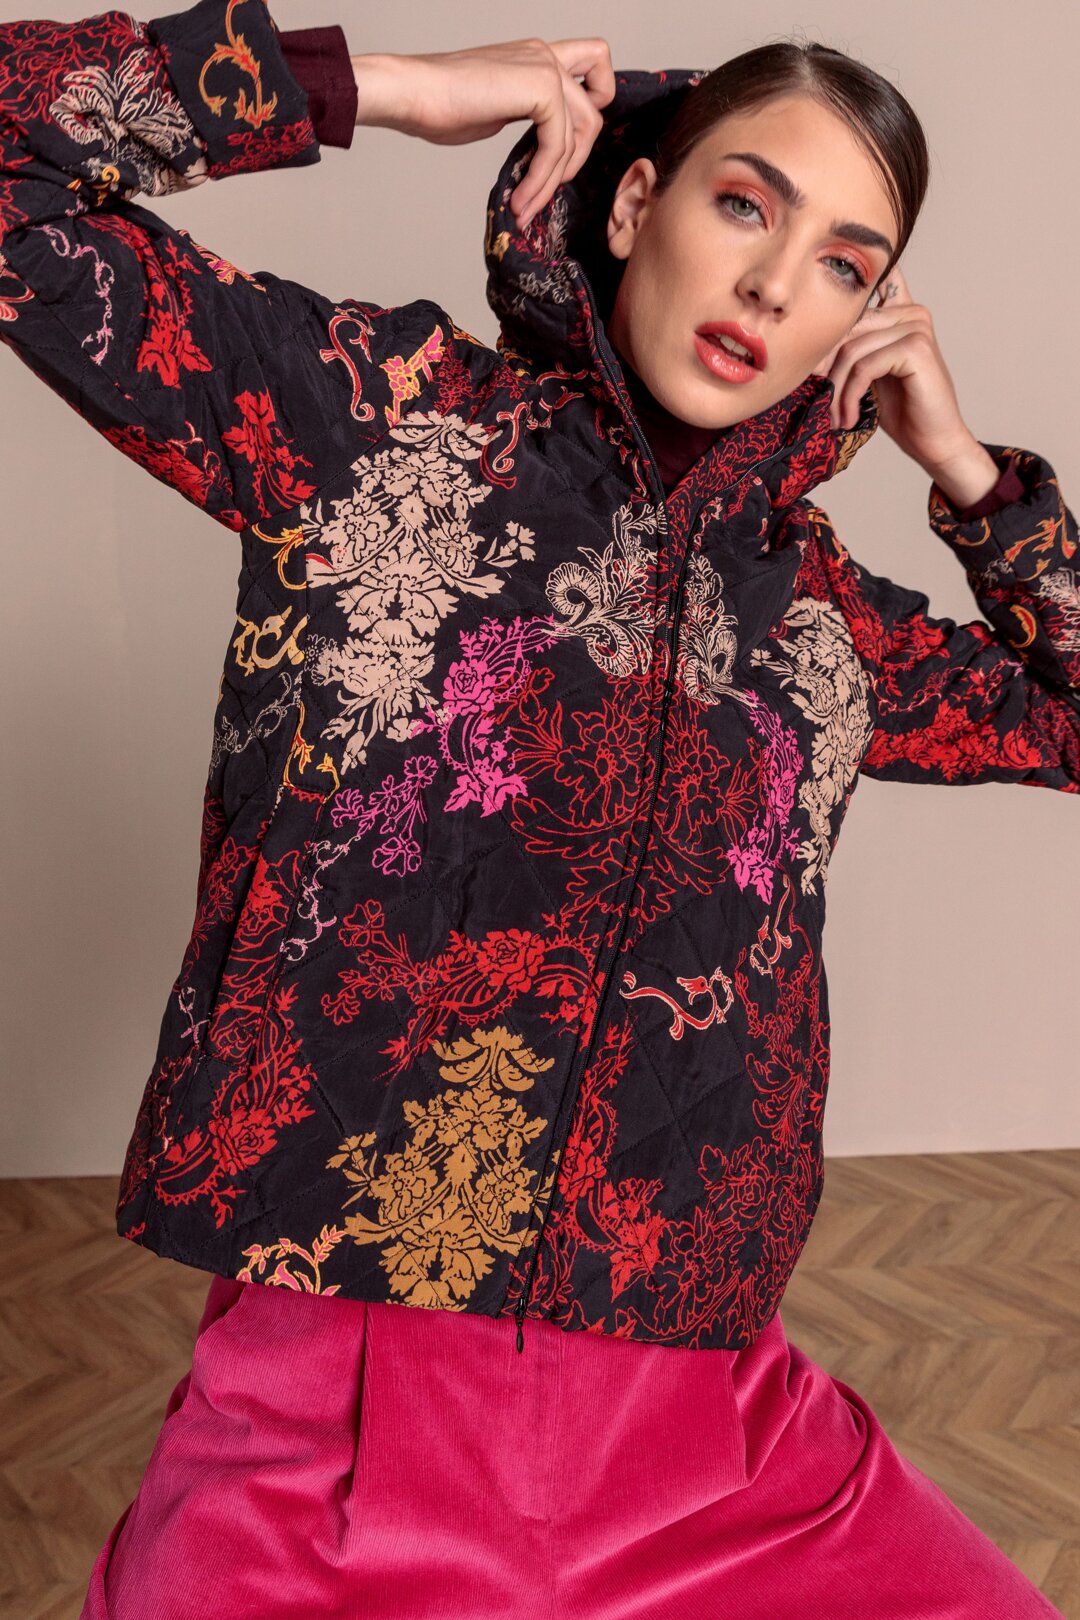 Quilted Jacket, Floral Pattern